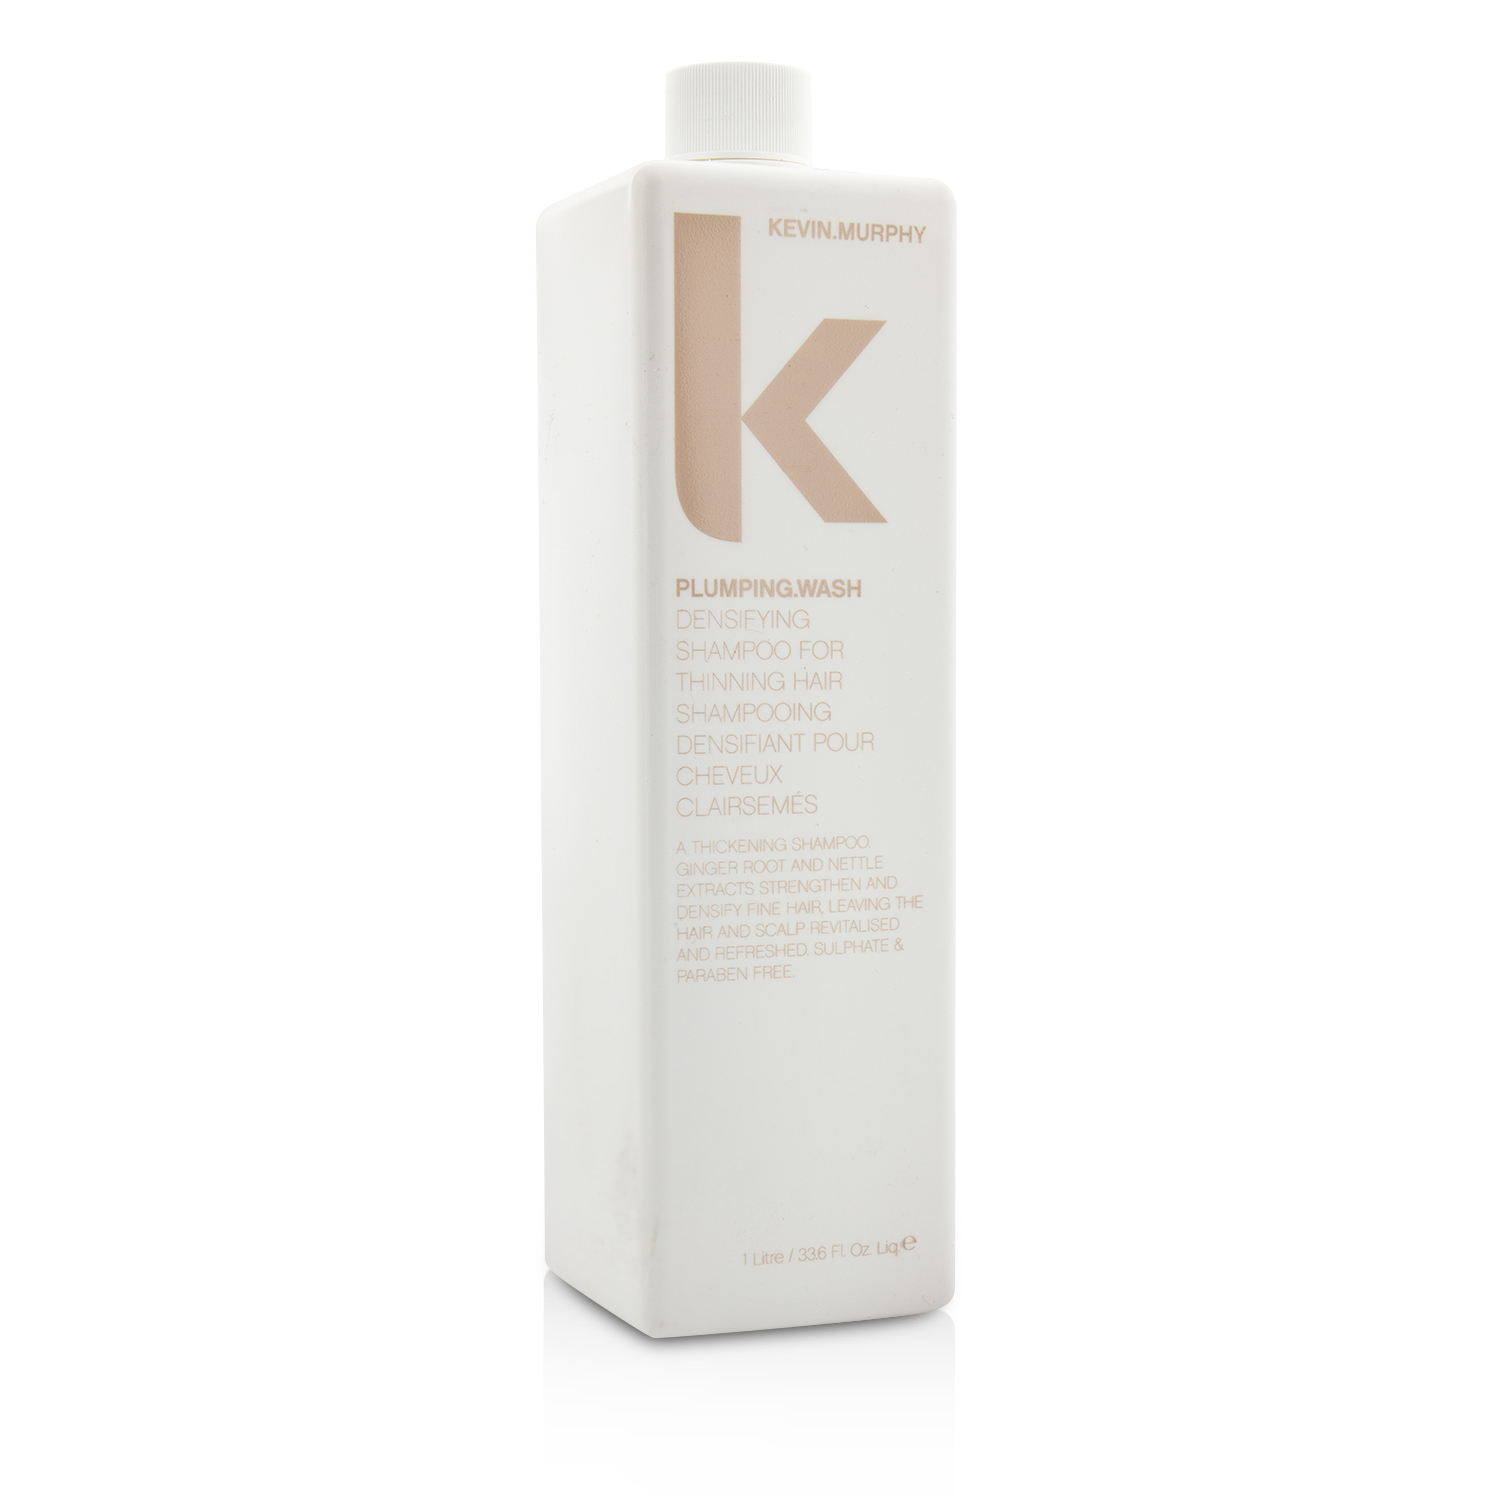 Plumping.Wash Densifying Shampoo (A Thickening Shampoo - For Thinning Hair) Kevin.Murphy Image